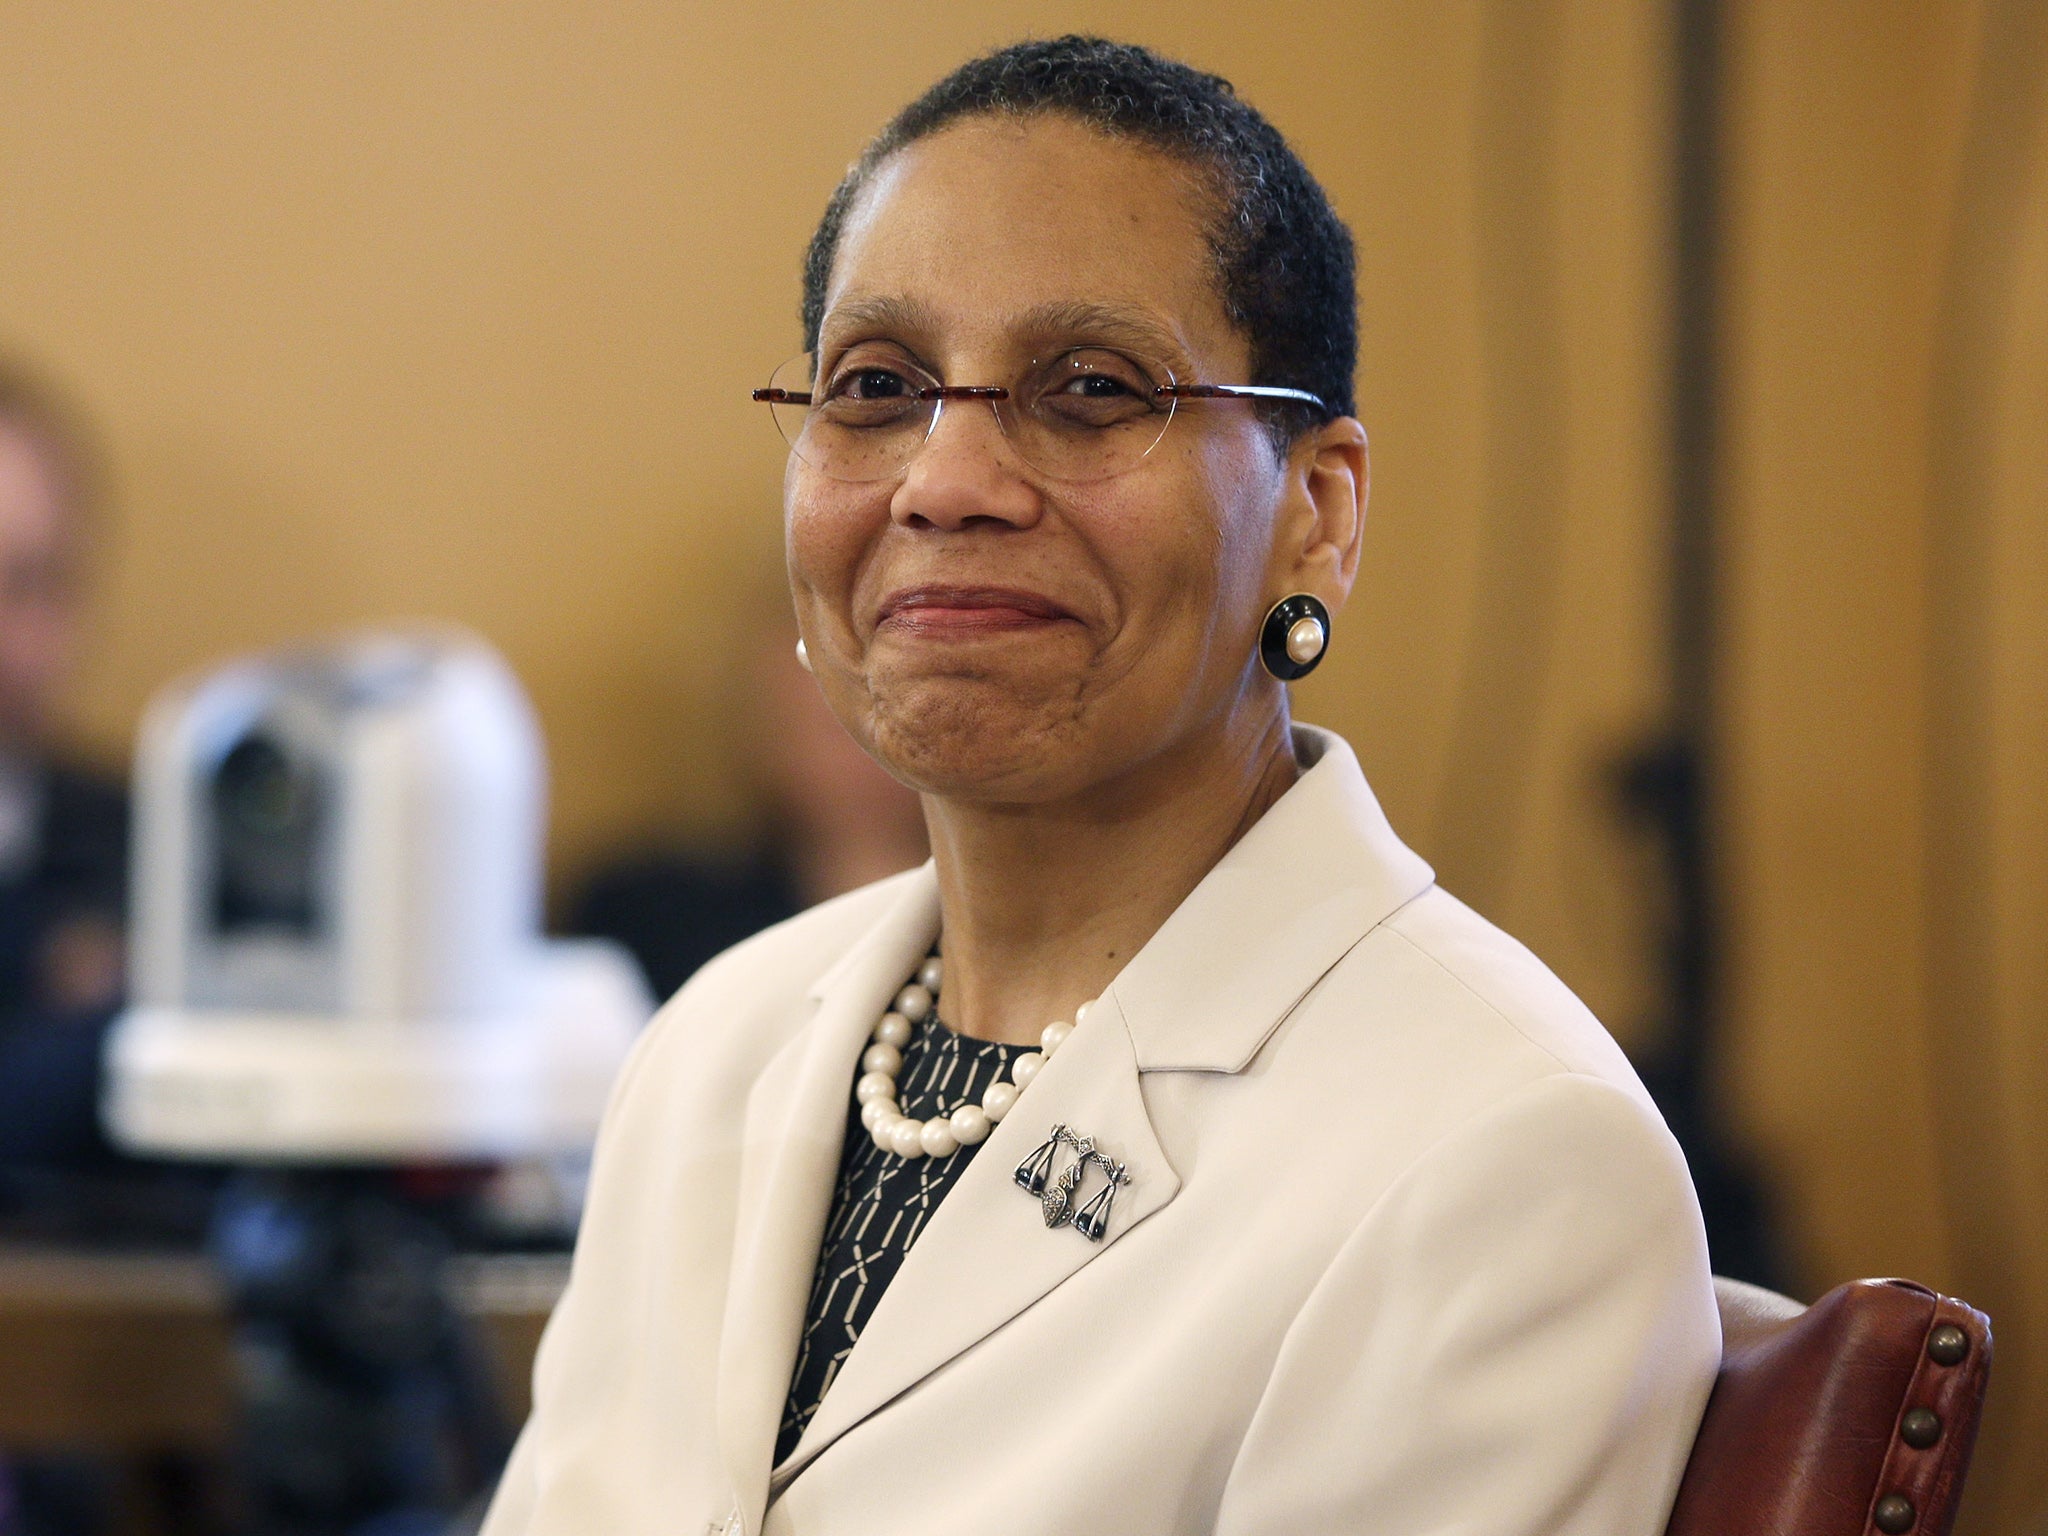 Colleagues described Sheila Abdus-Salaam as ‘a pioneer’ who will be ‘missed deeply’